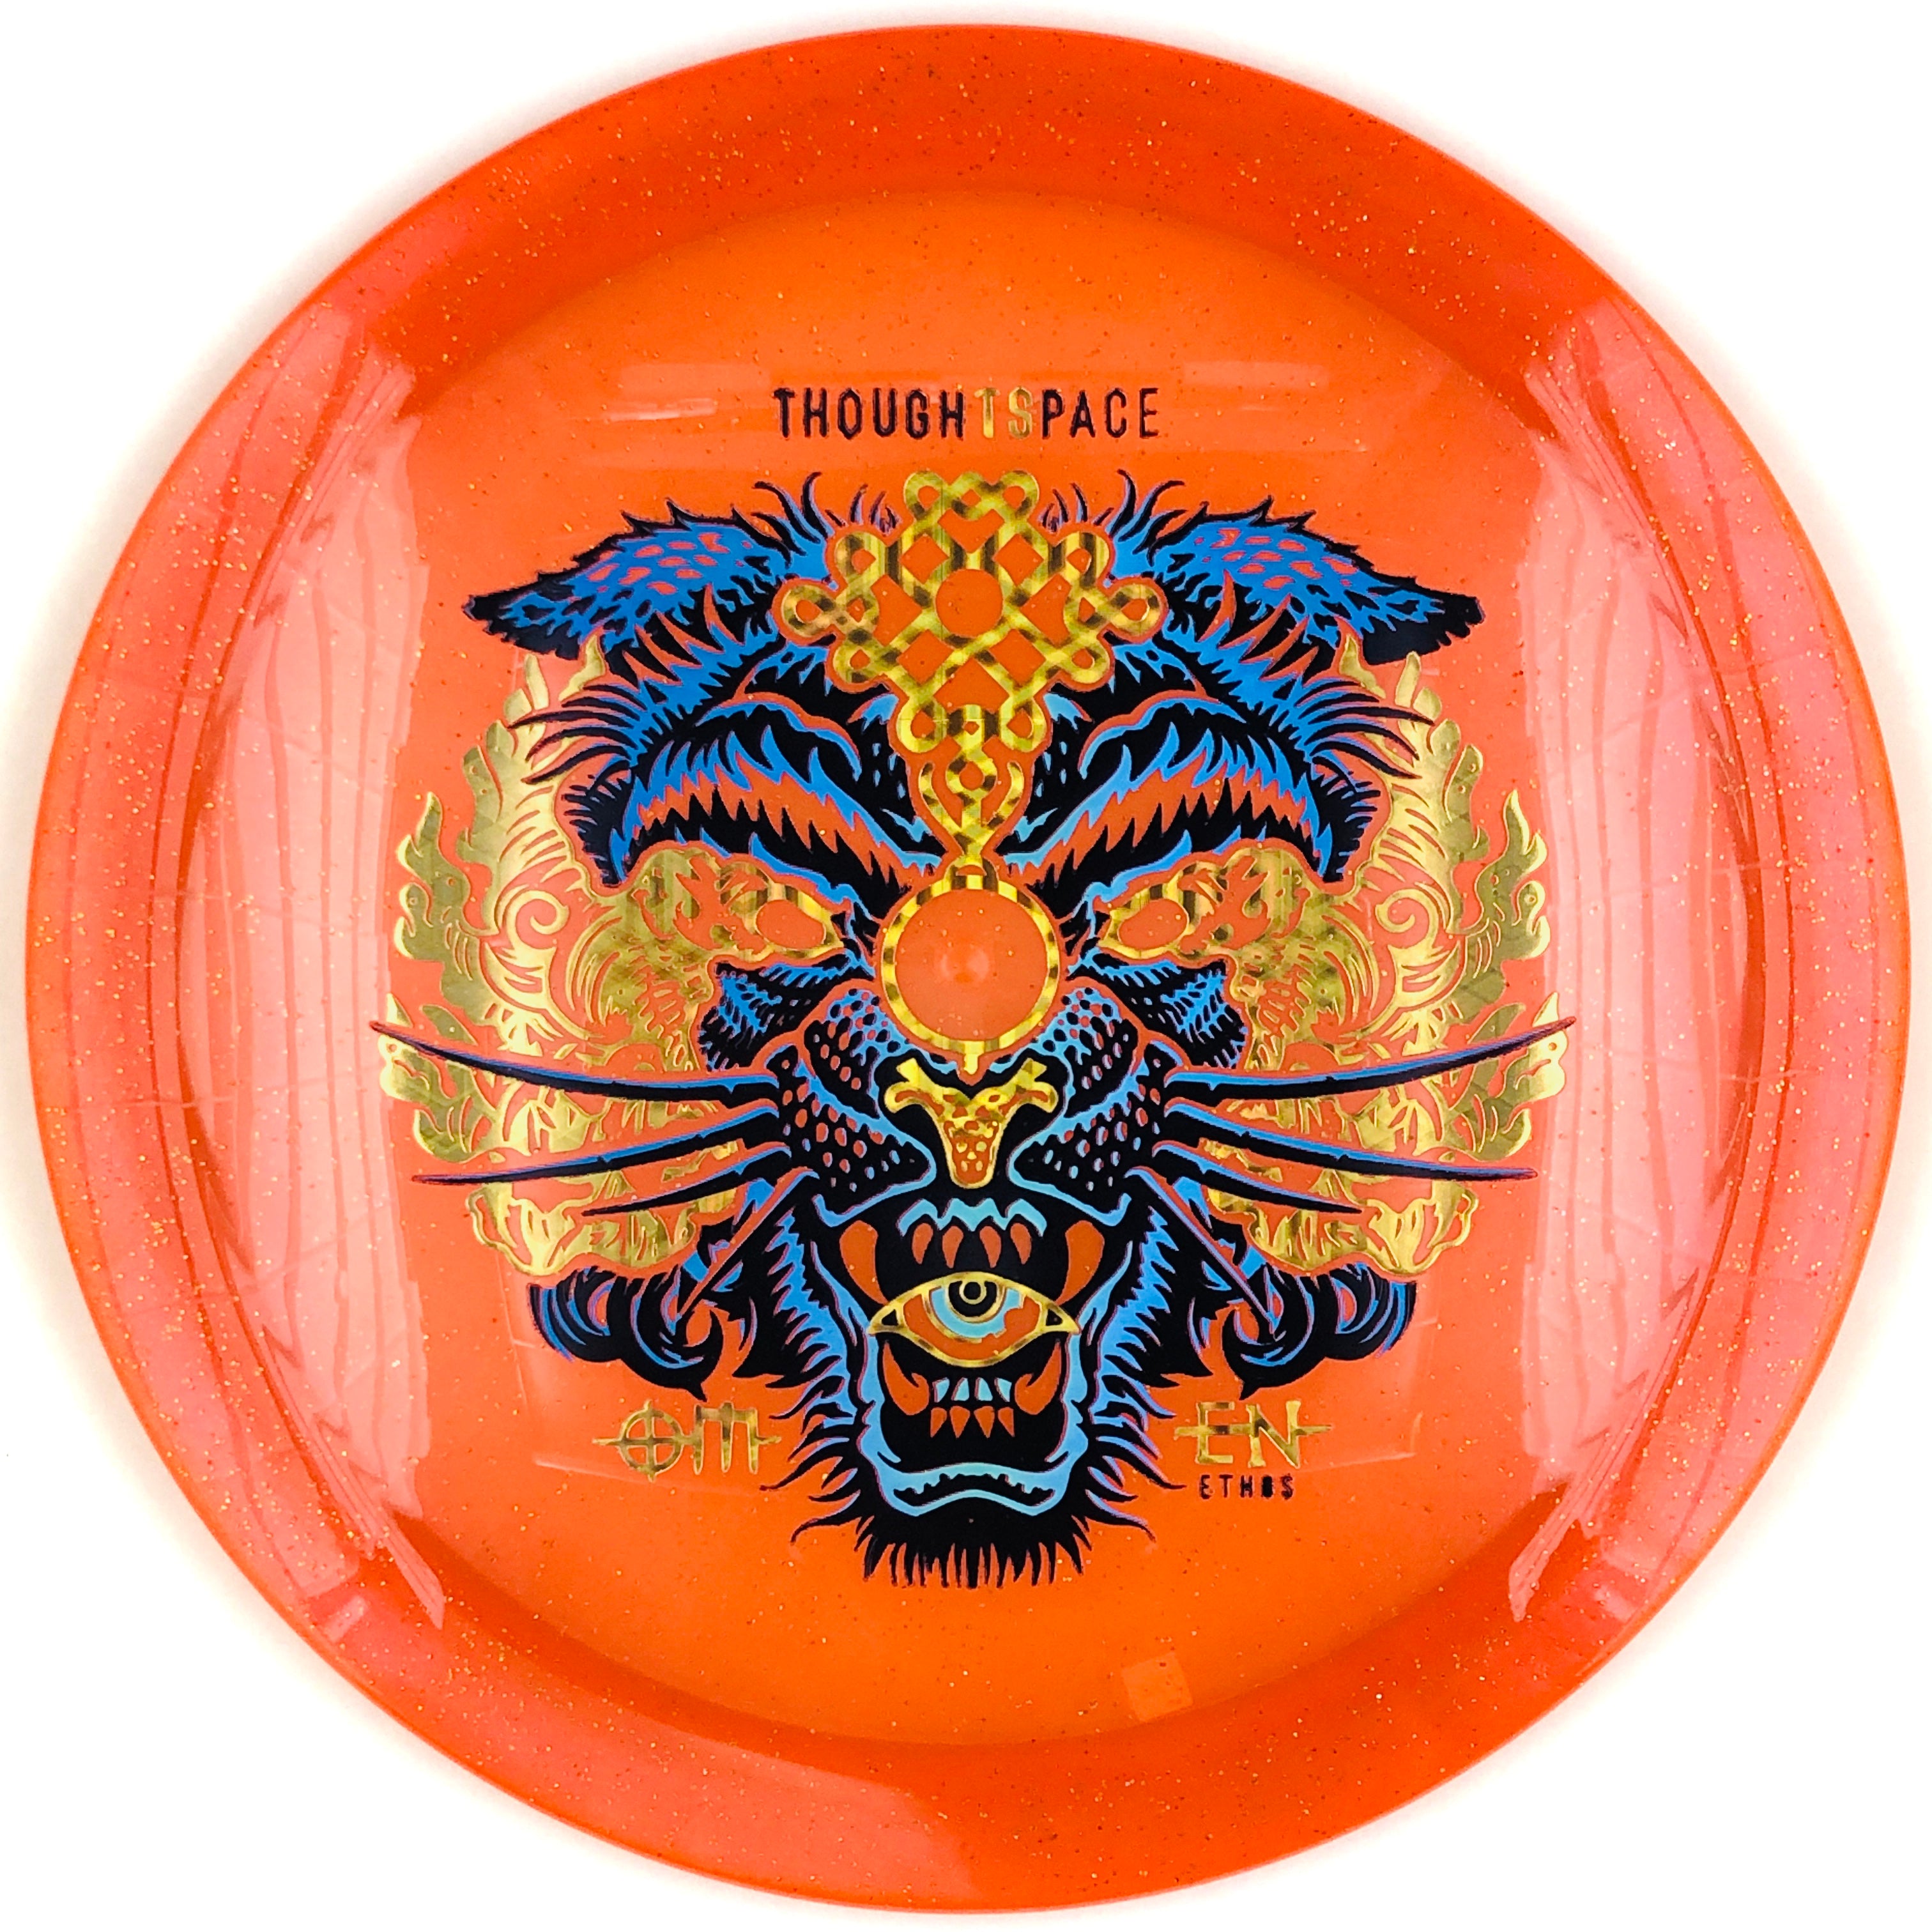 Thought Space Athletics Ethos Omen (Distance Driver)